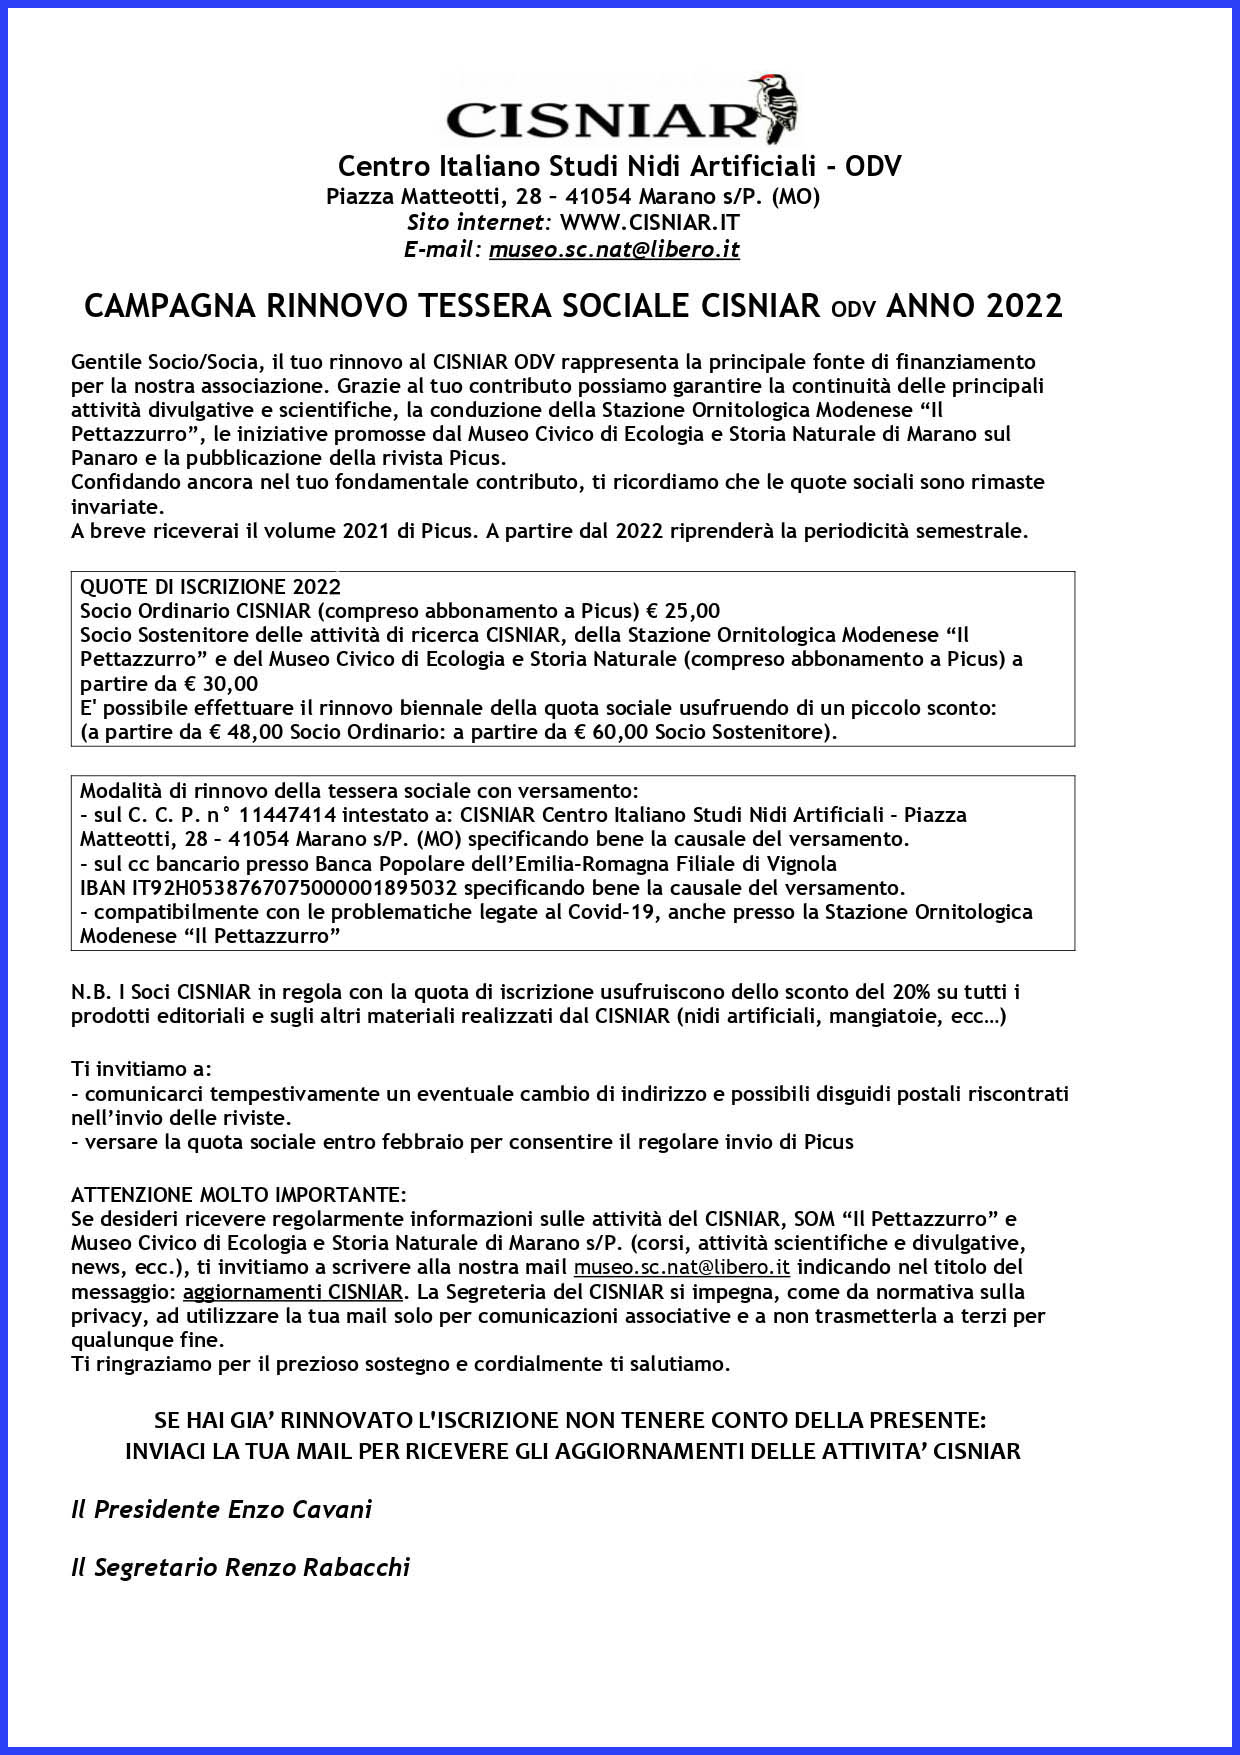 Lettera Scadenza Soci 2022 per Facebook_pages-to-jpg-0001